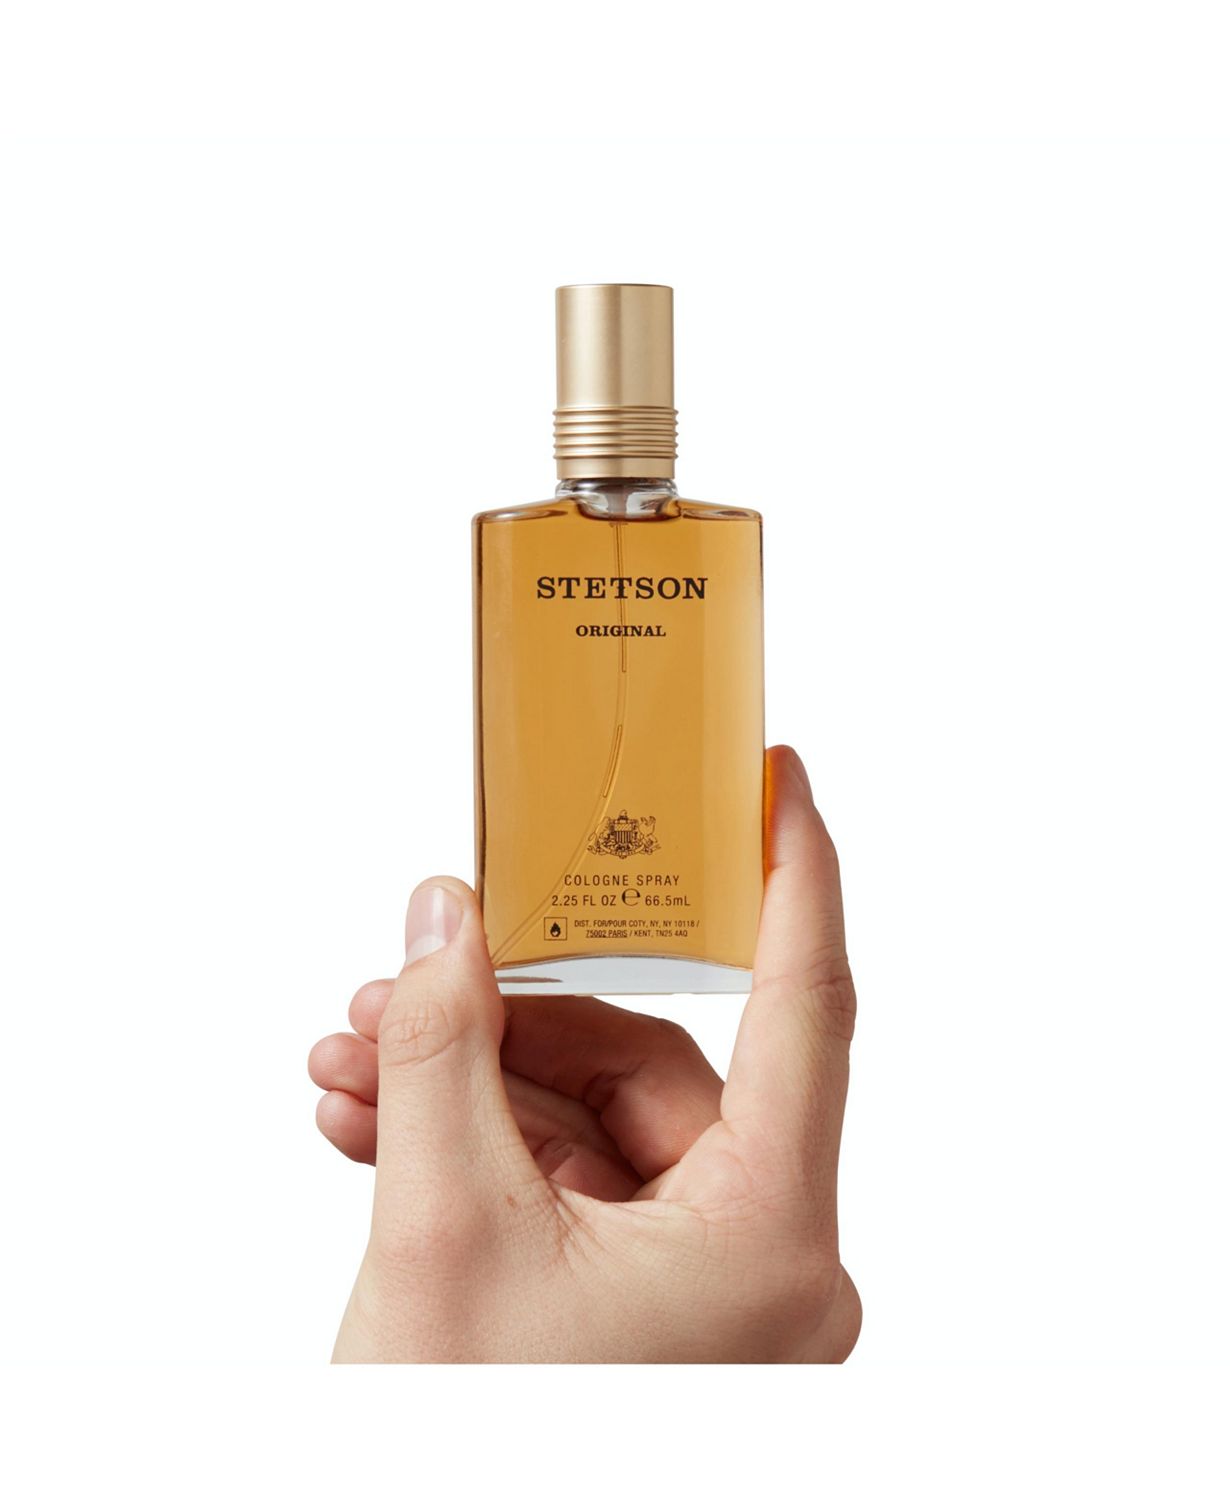 Stetson Original by Cologne for Men - Classic, Woody and Masculine Aroma with Fragrance Notes of Citrus, Patchouli, and Tonka Bean - 2.25 Fl Oz